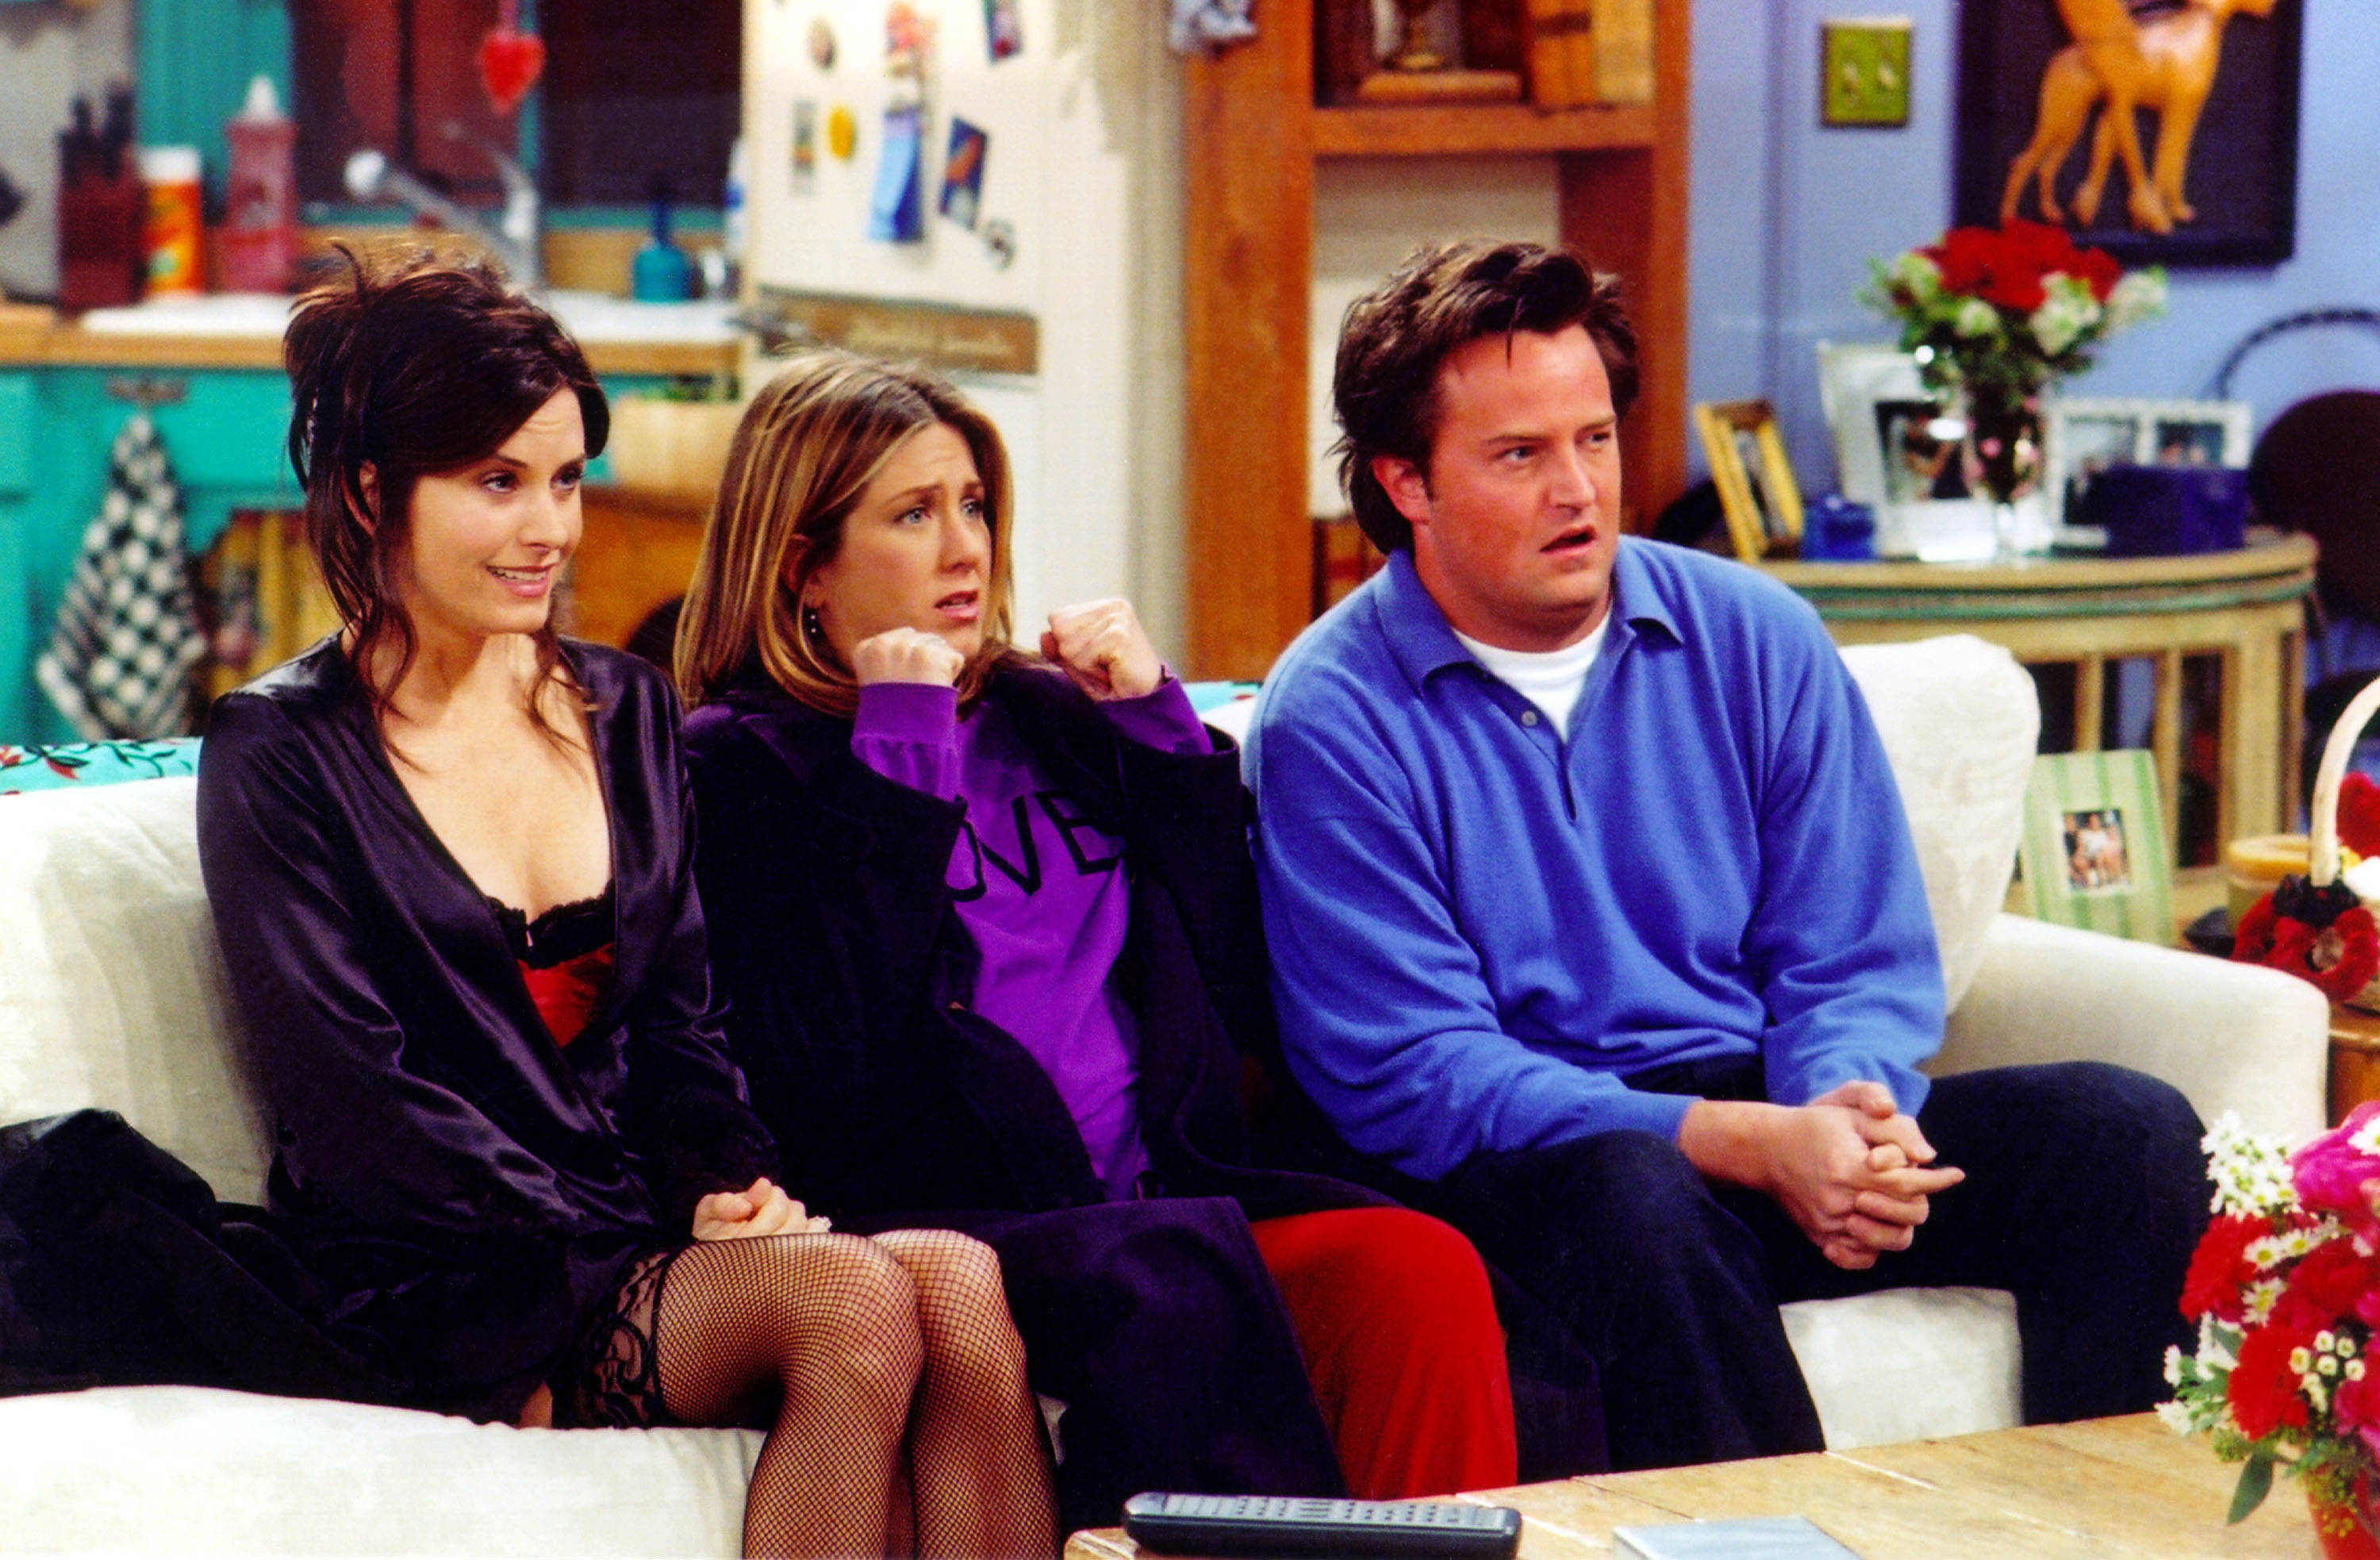 Courteney Cox, Jennifer Aniston and Matthew Perry on the NBC series "Friends" | Source: Getty Images